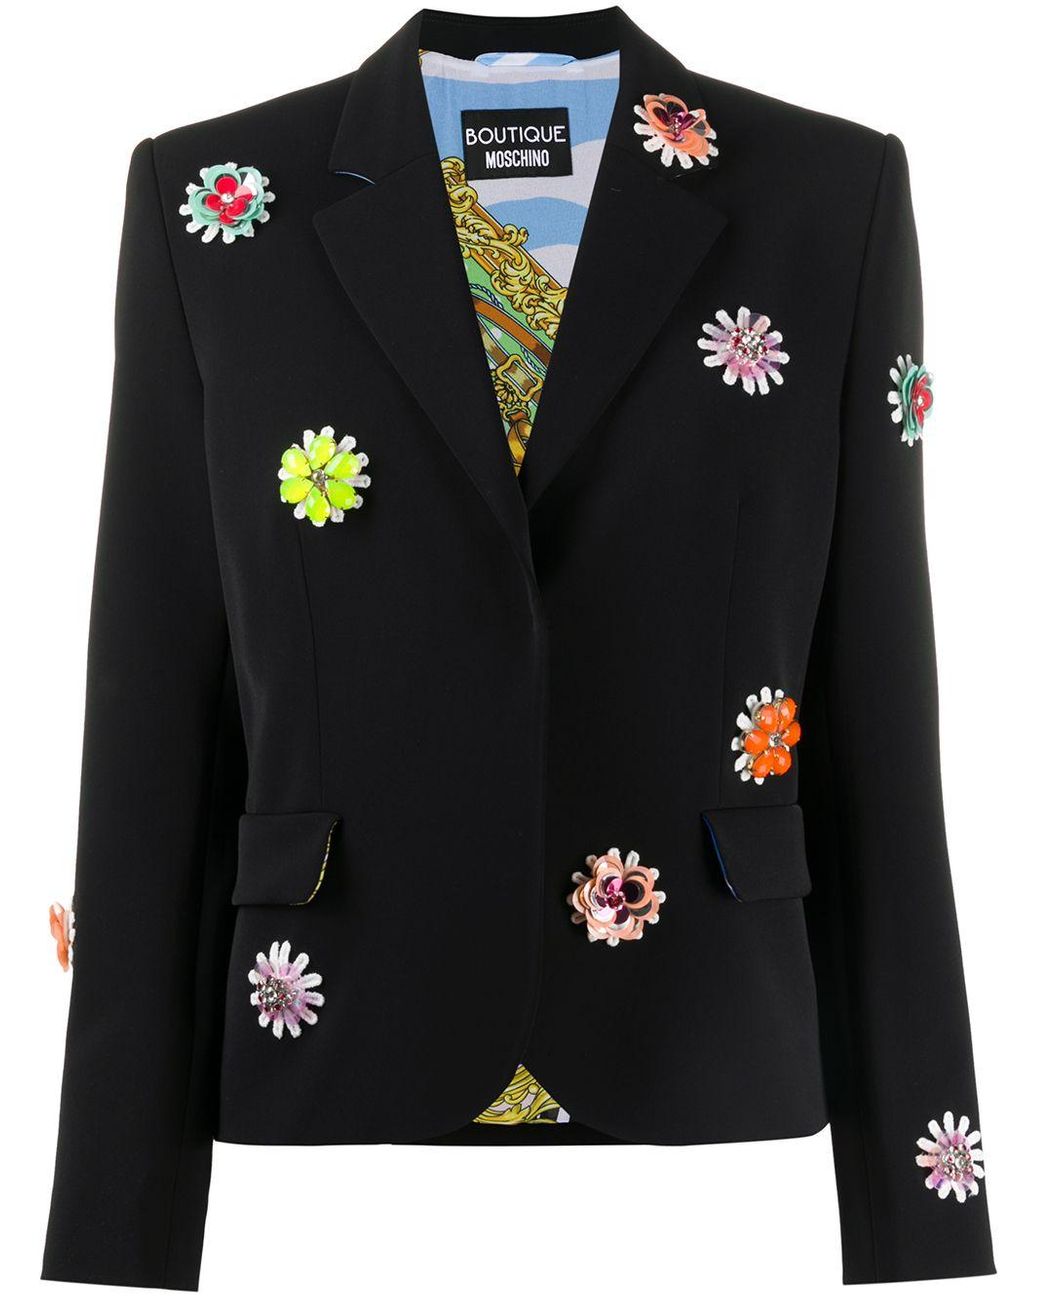 Boutique Moschino Synthetic Floral Embroidered Blazer in Black - Lyst